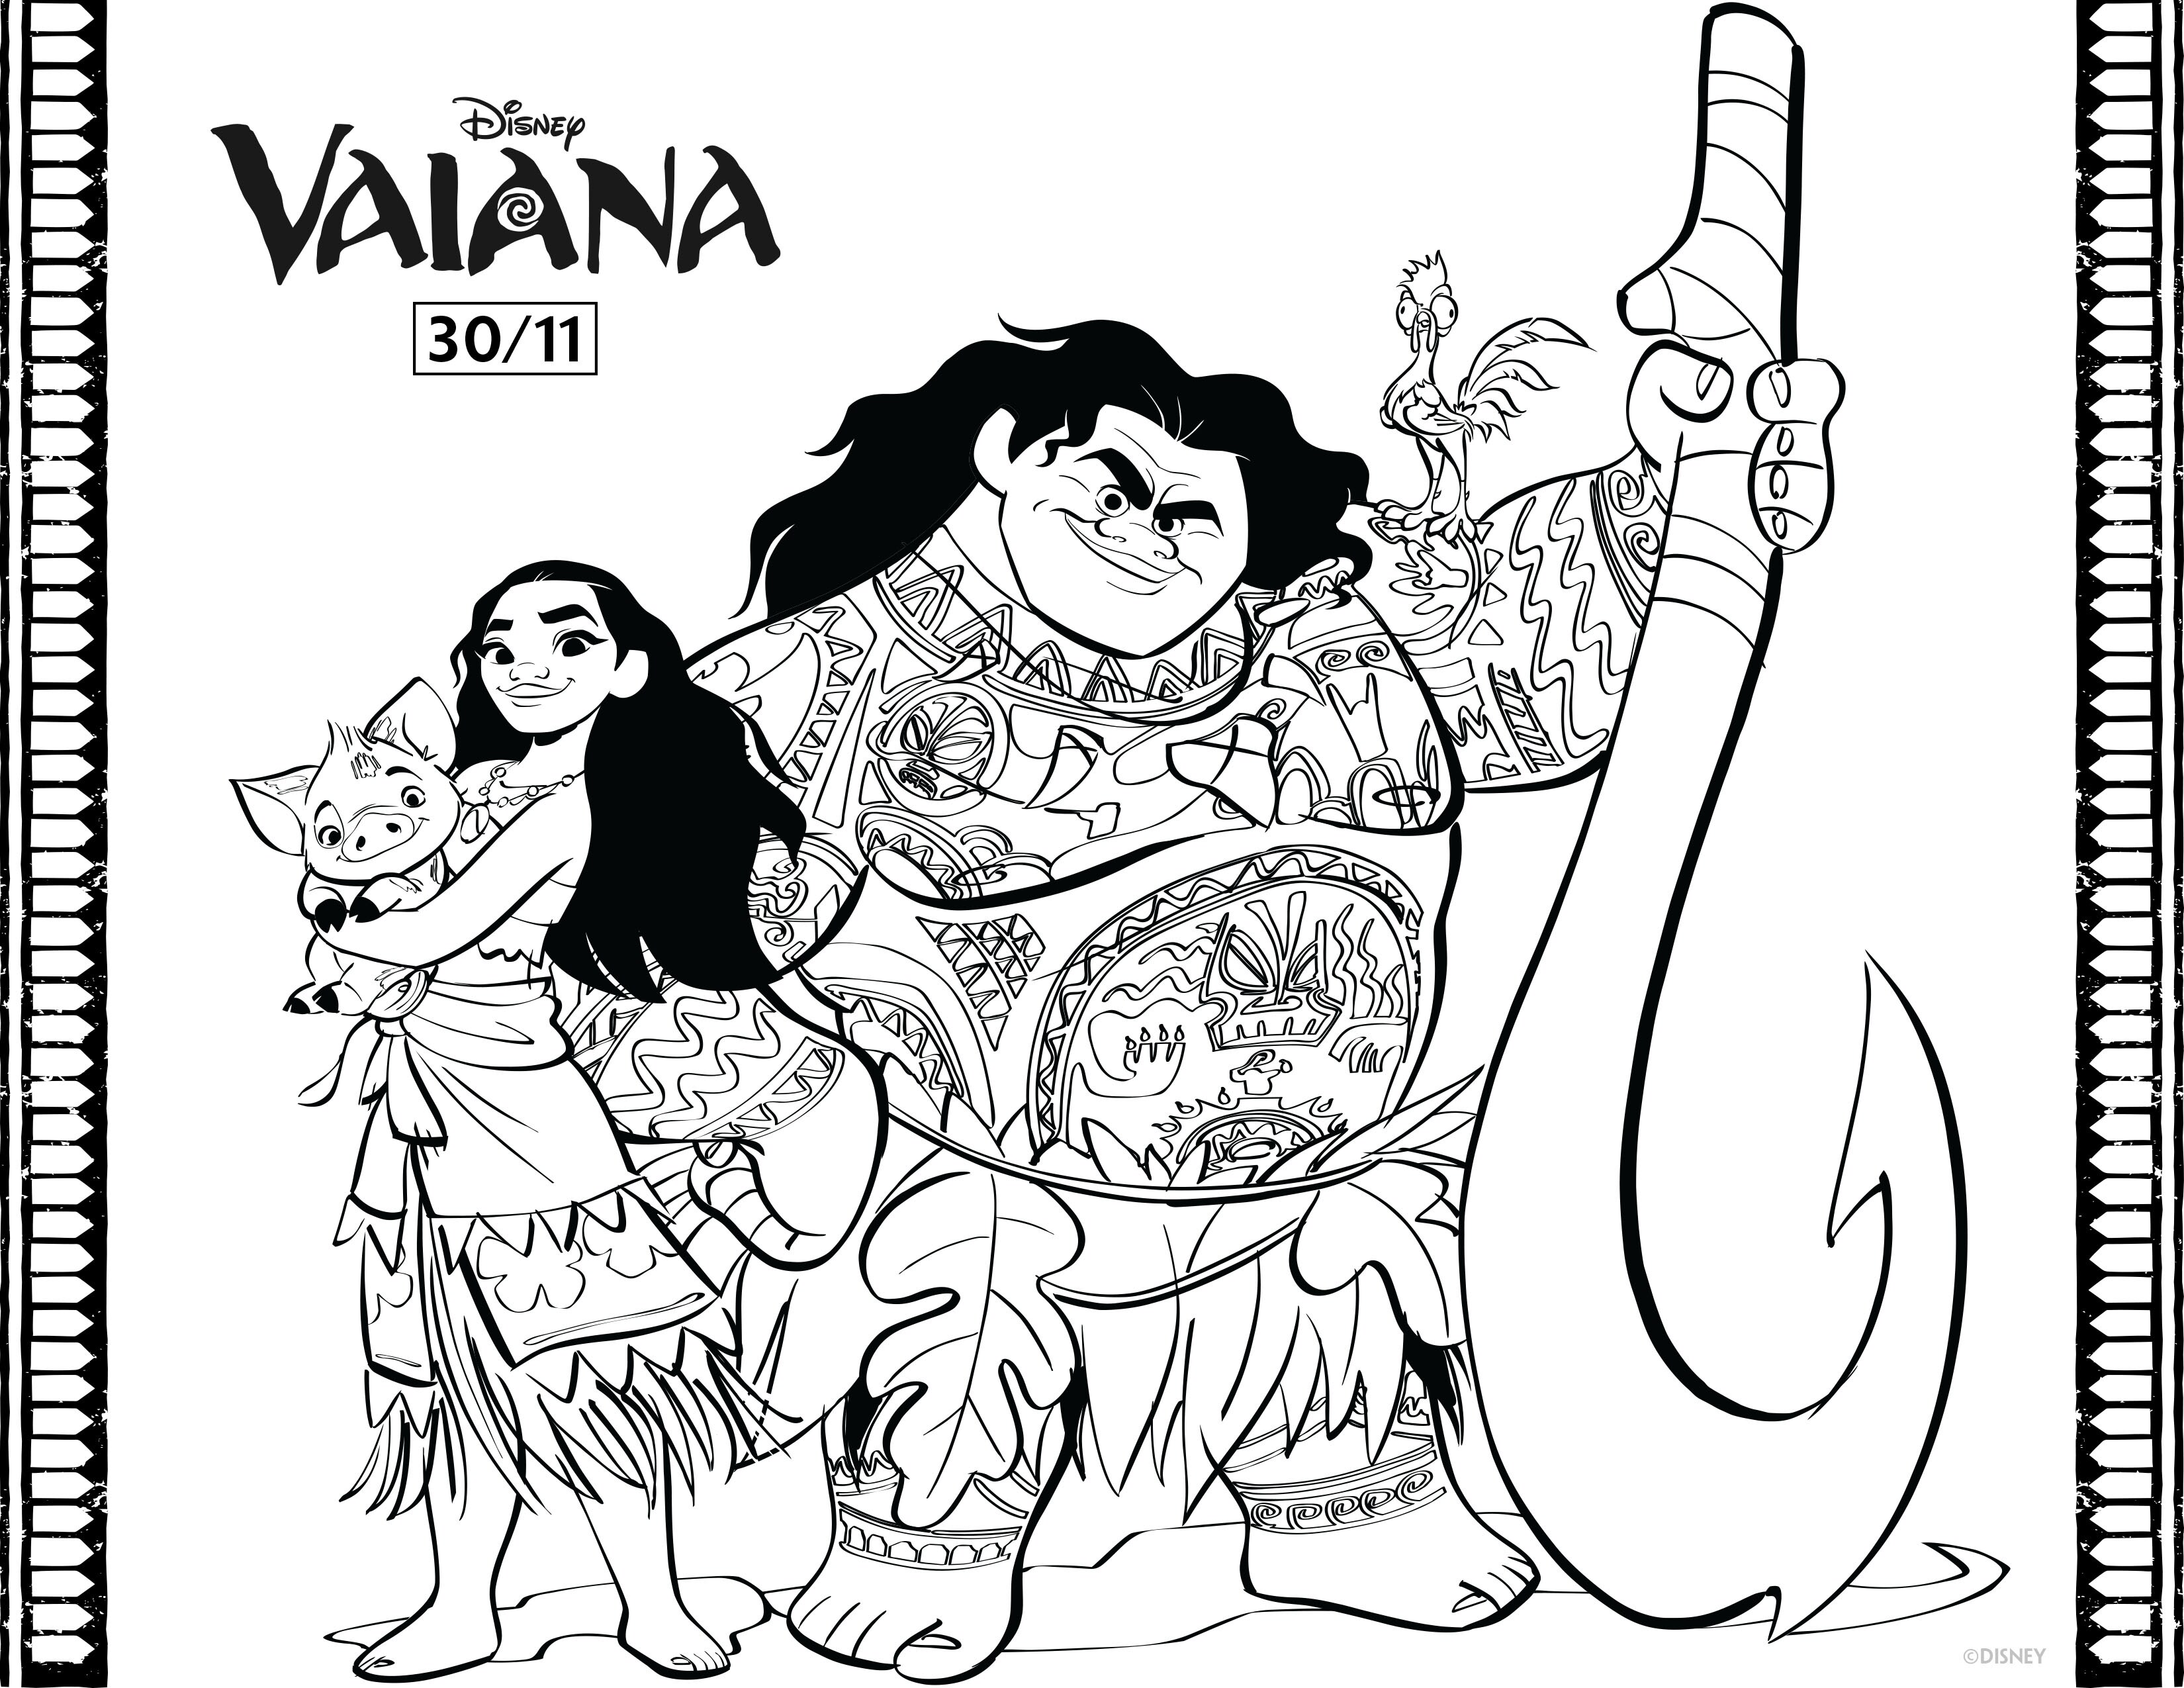 moana group 2 coloring page c370f7a1